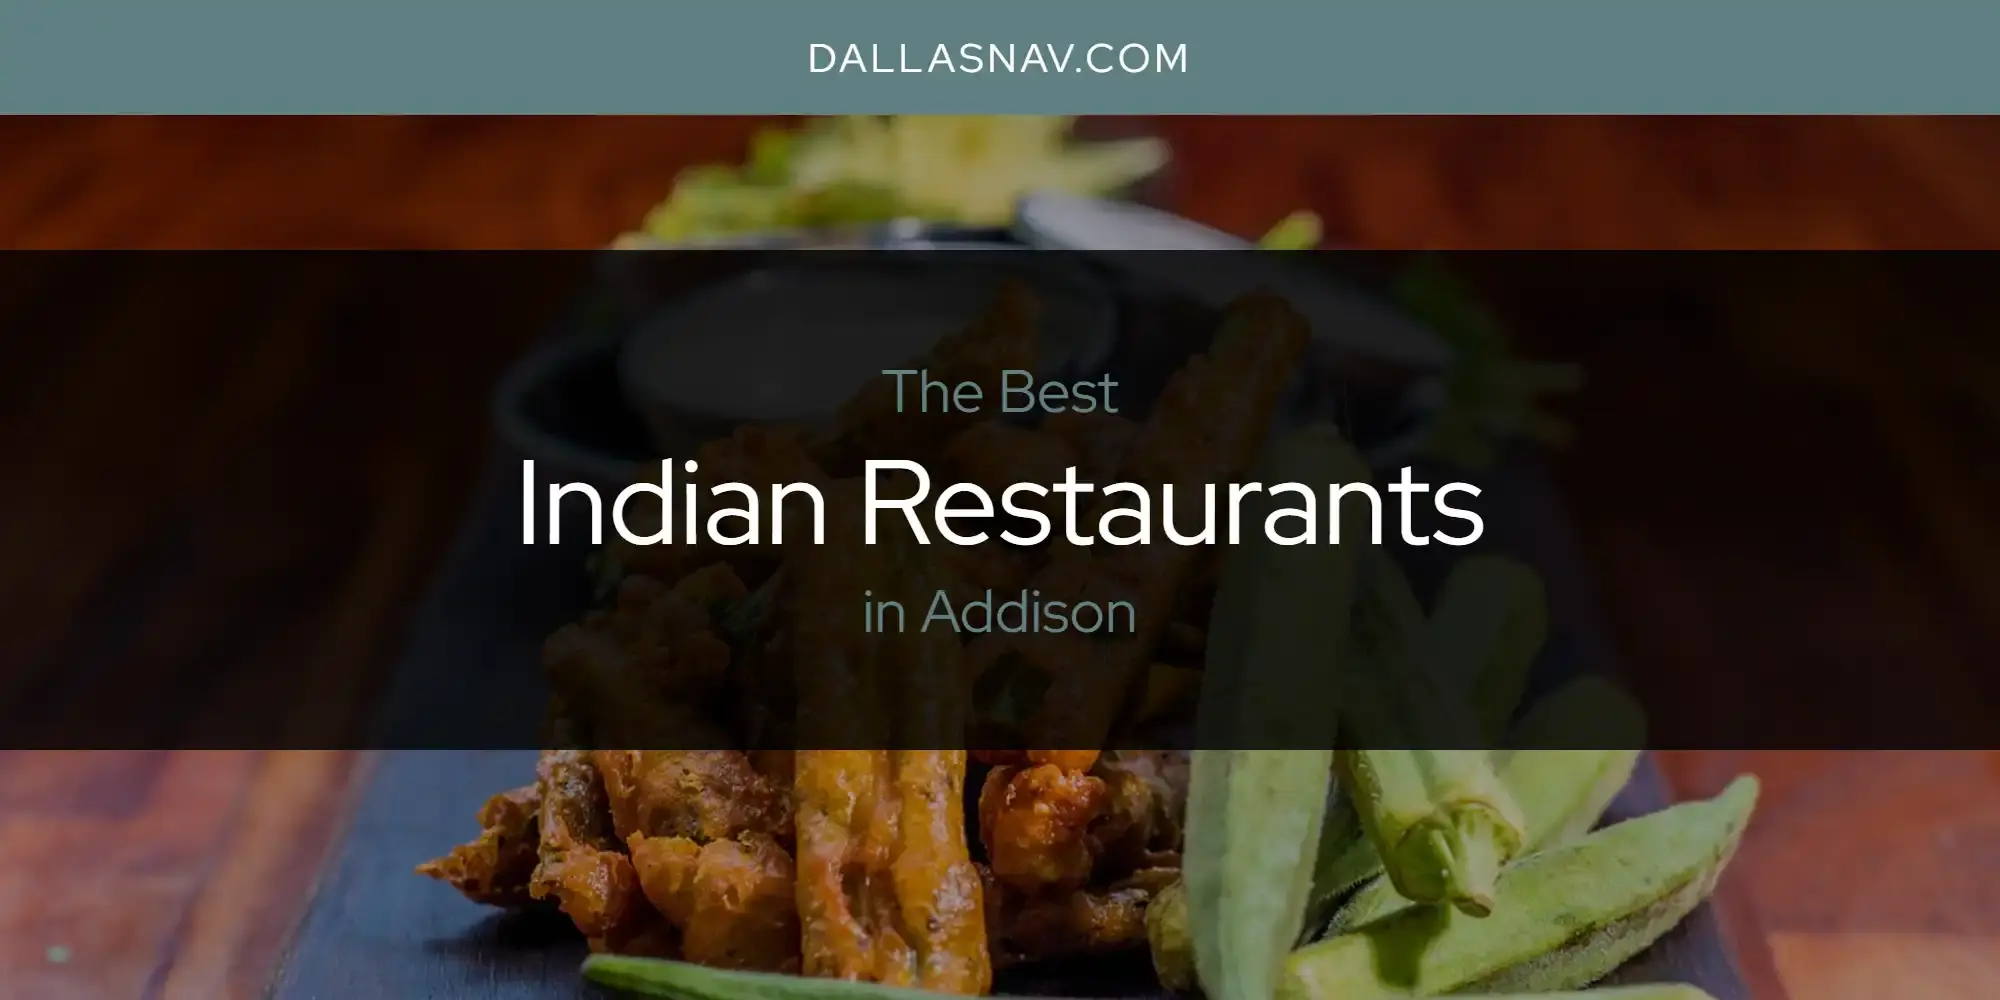 Best Indian Restaurants in Addison? Here's the Top 6